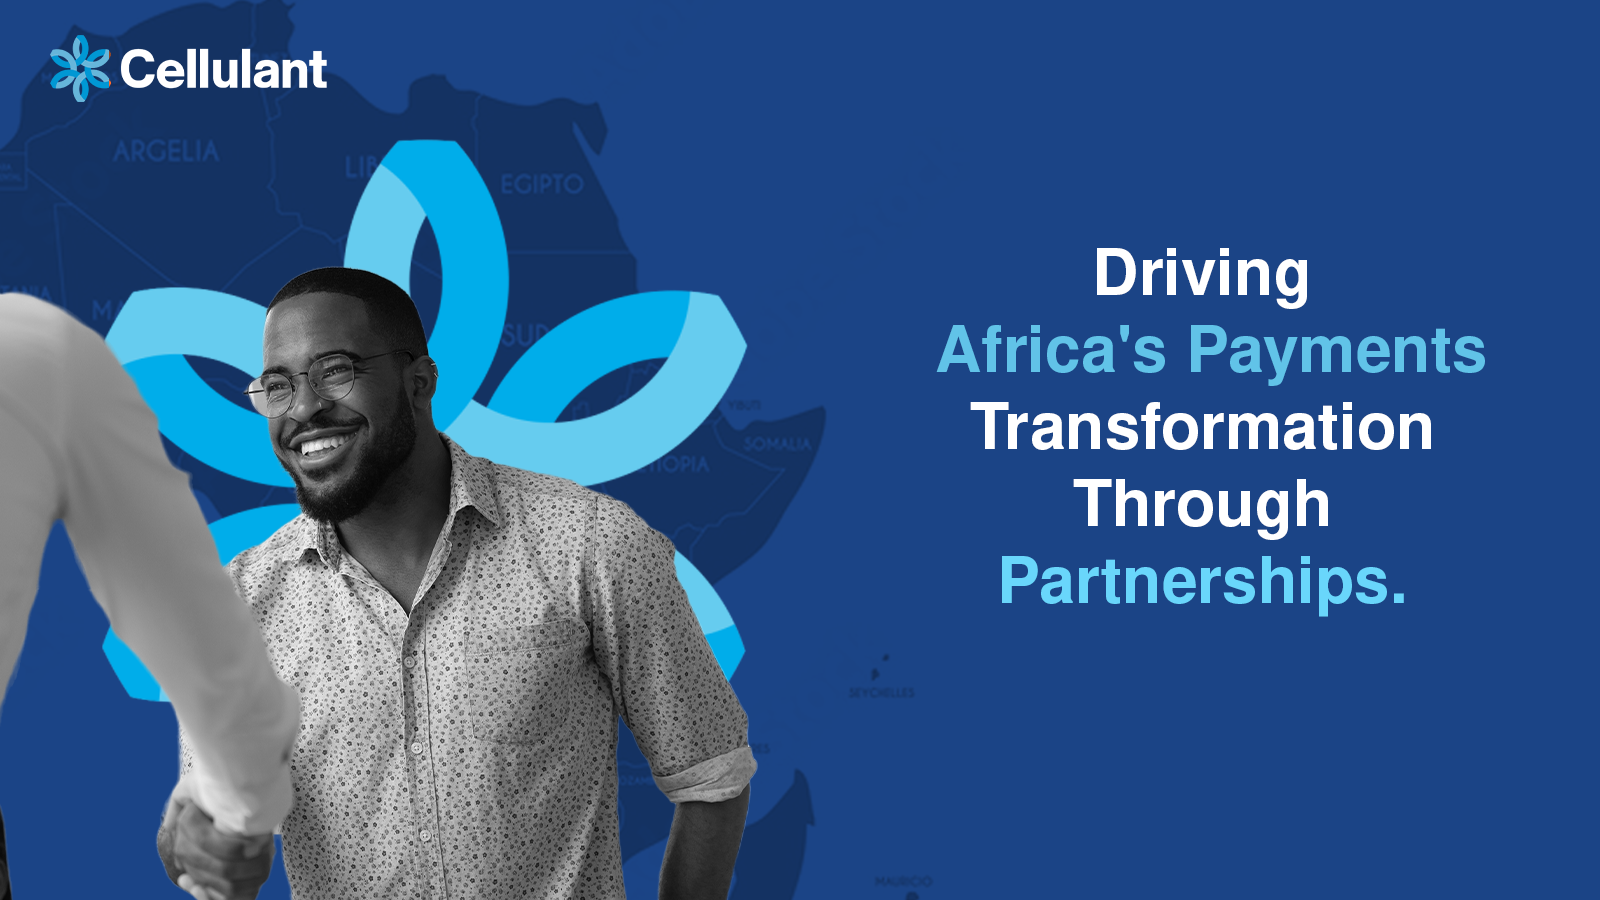 Driving Africa’s Payments Transformation Through Partnerships